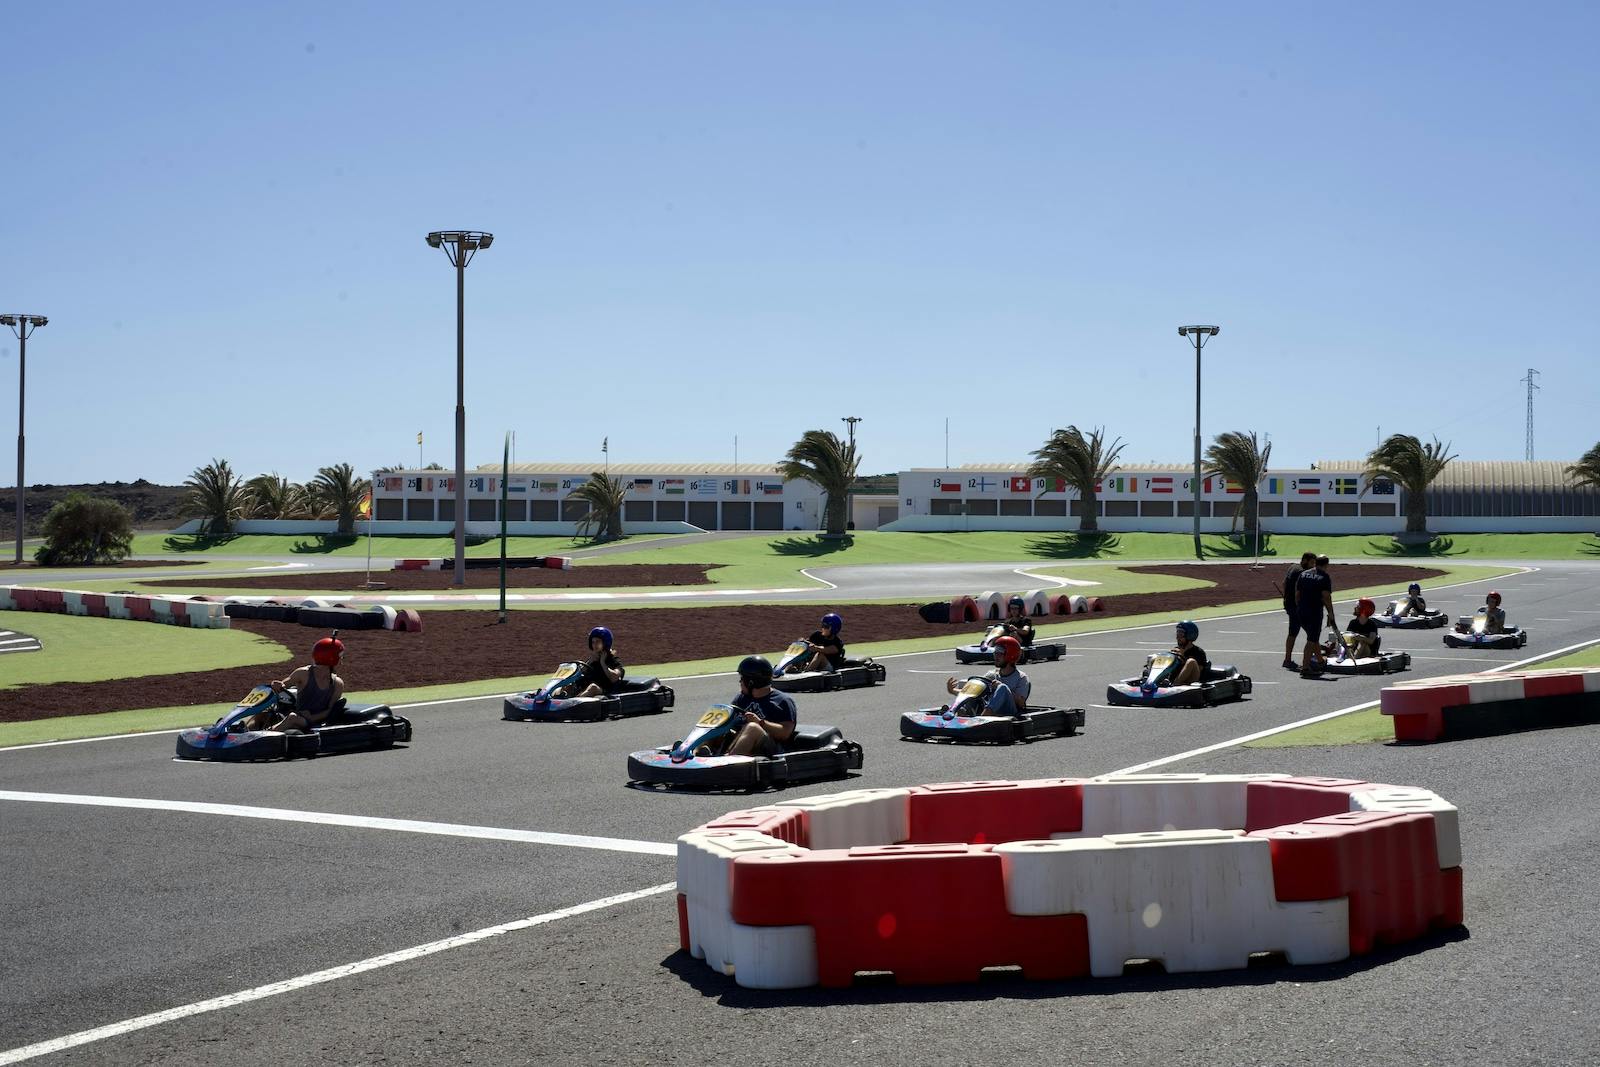 People go-karting near the capital city of Lanzarote